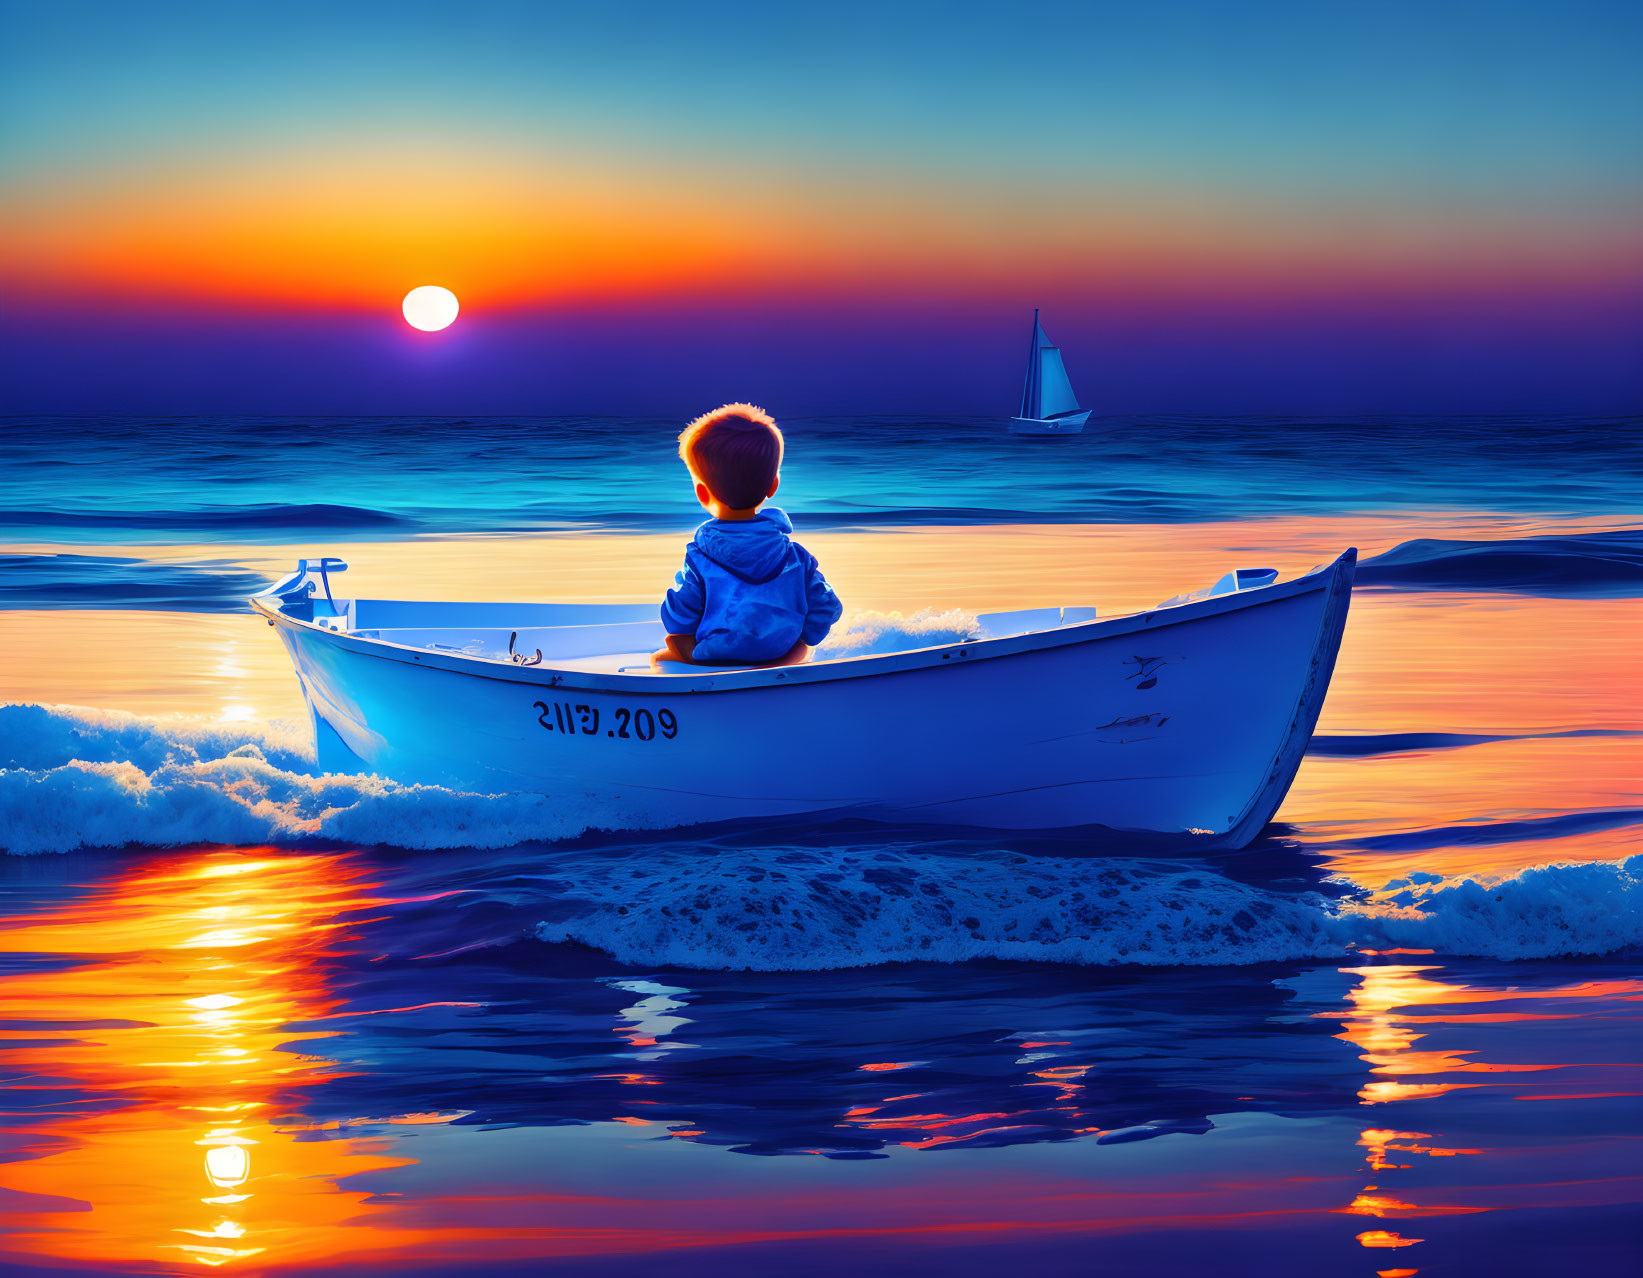 Child in boat at sunset gazes at vibrant sky with distant sailboat